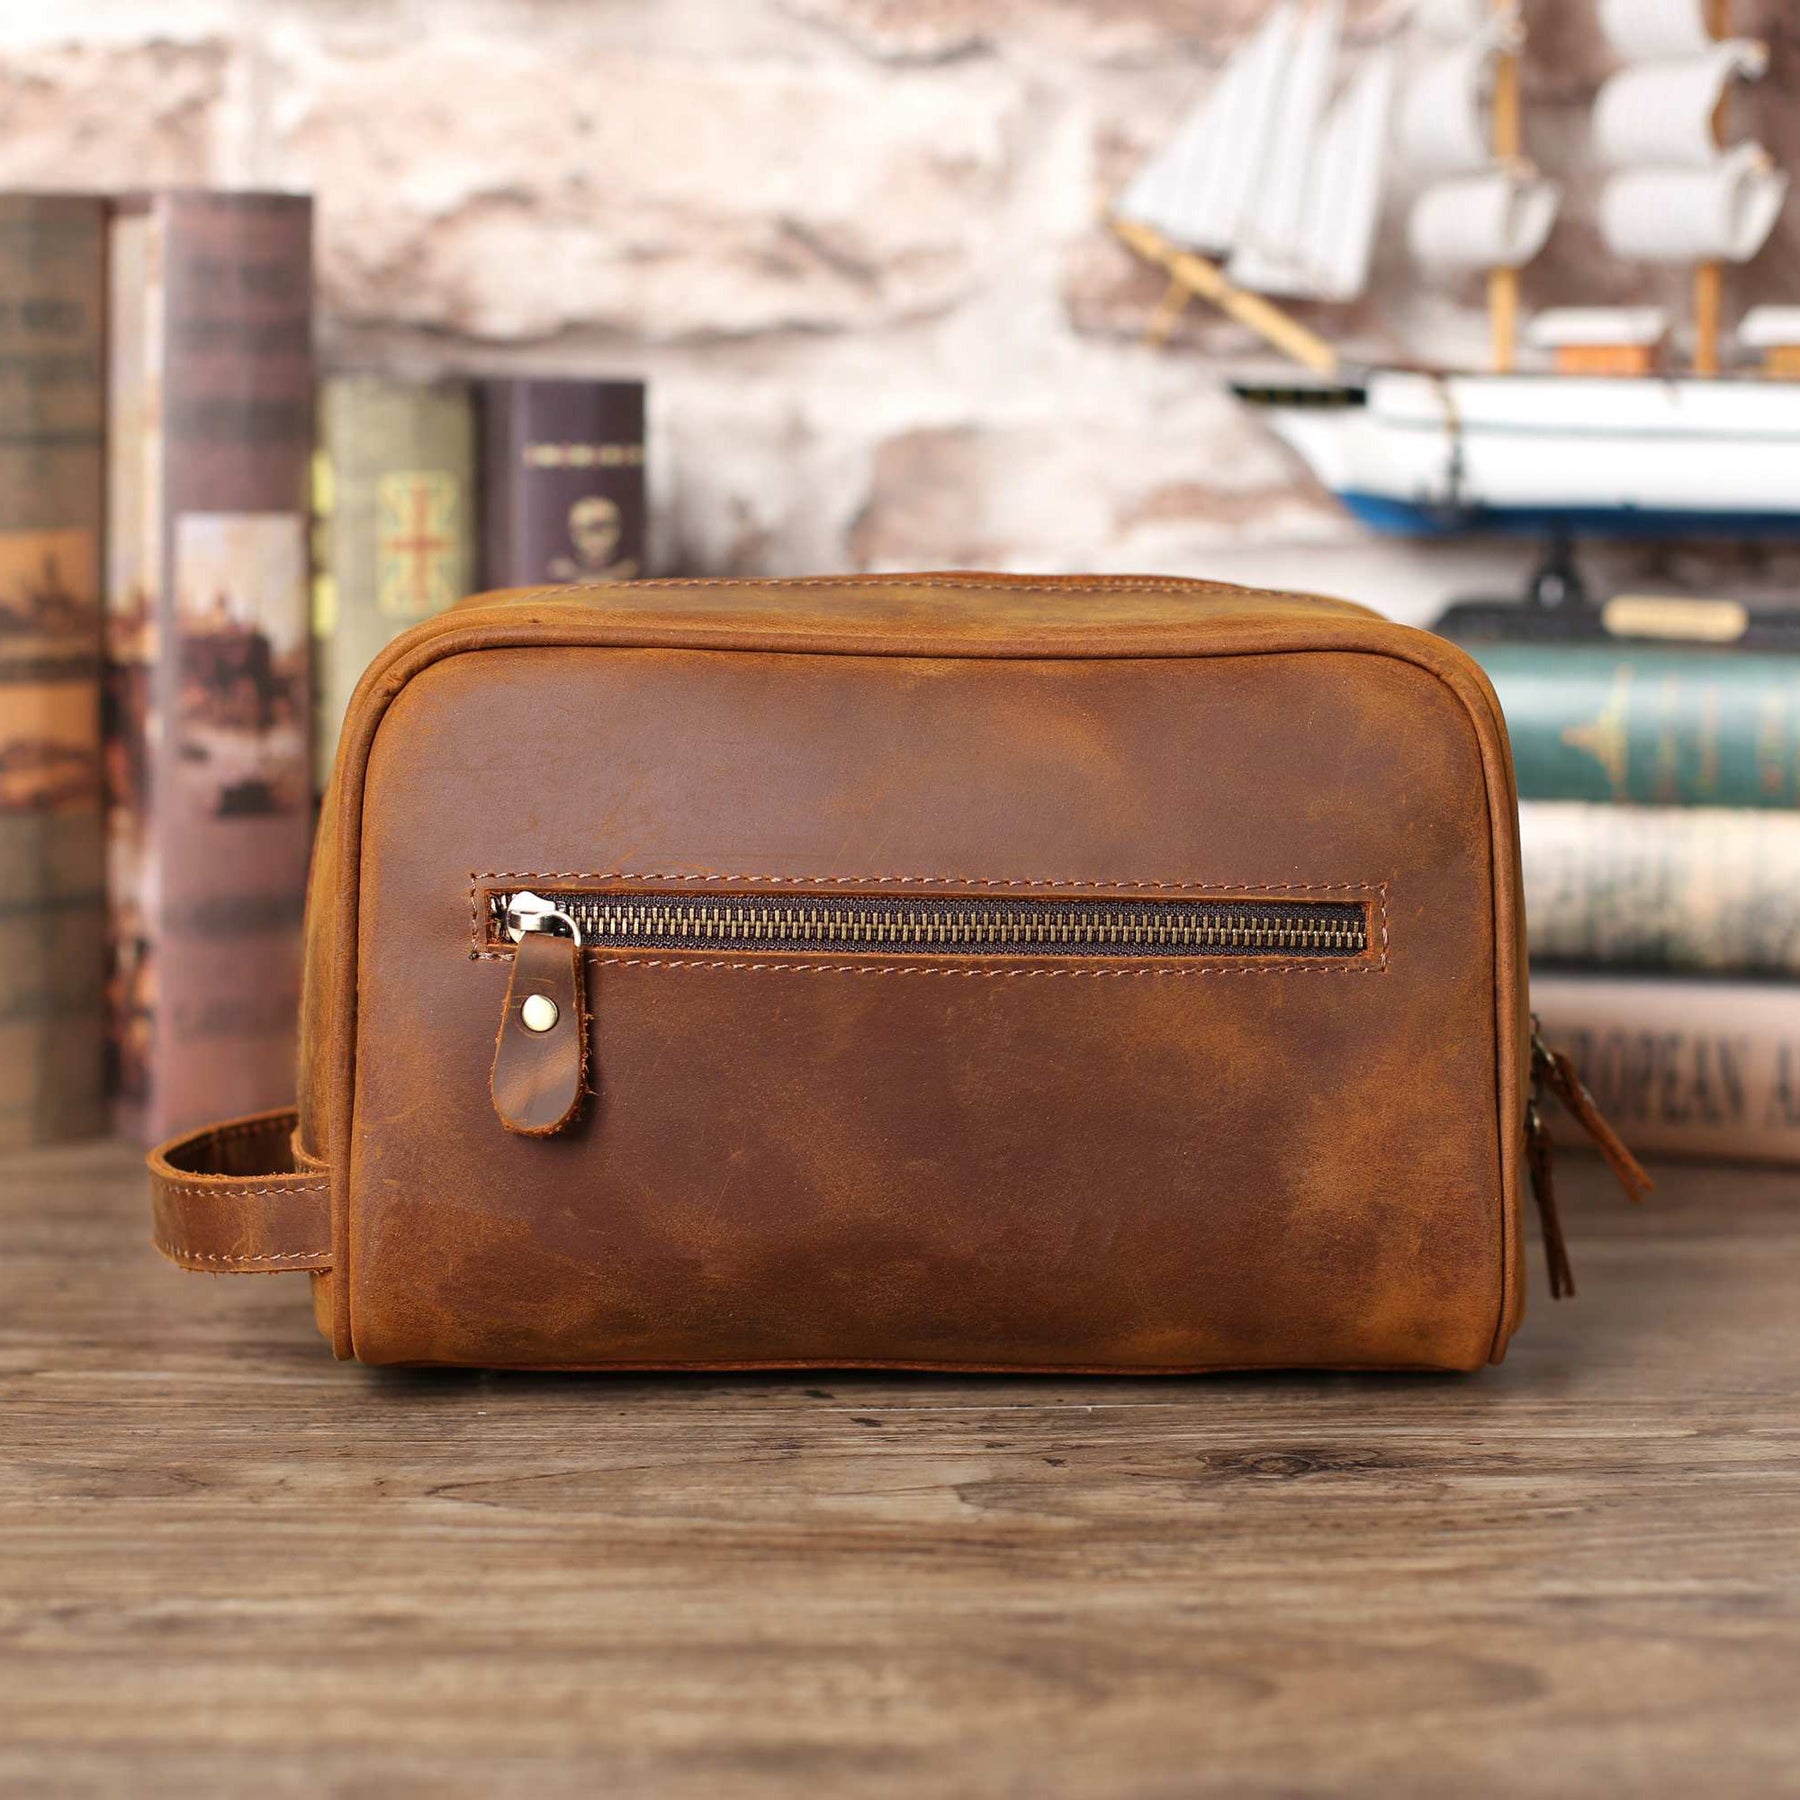 Groovy Guy Leather Personalized Toiletry Bag with Monogrammed Initials -  Brown - Groovy Guy Gifts